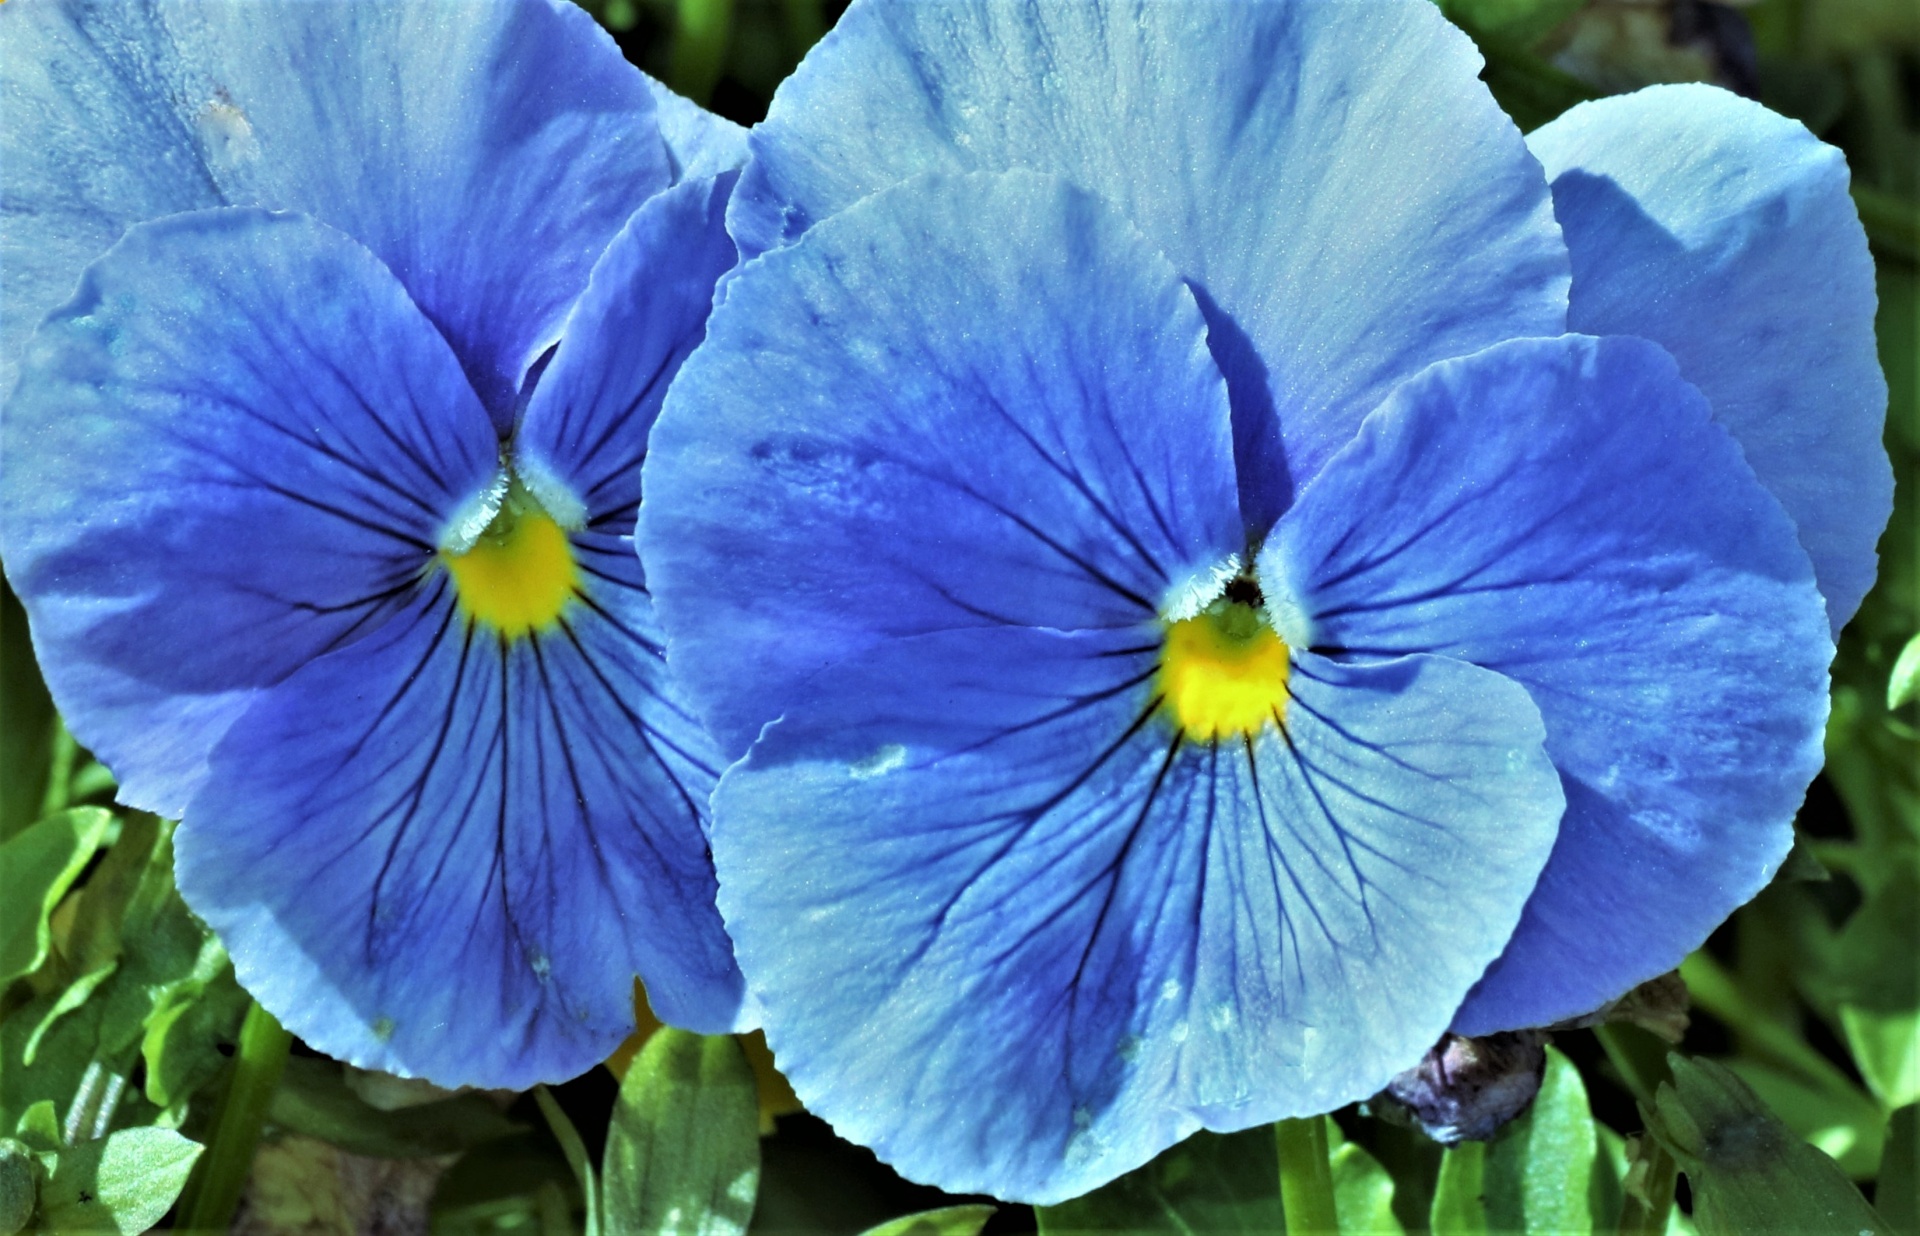 Two Blue Pansies Close-up